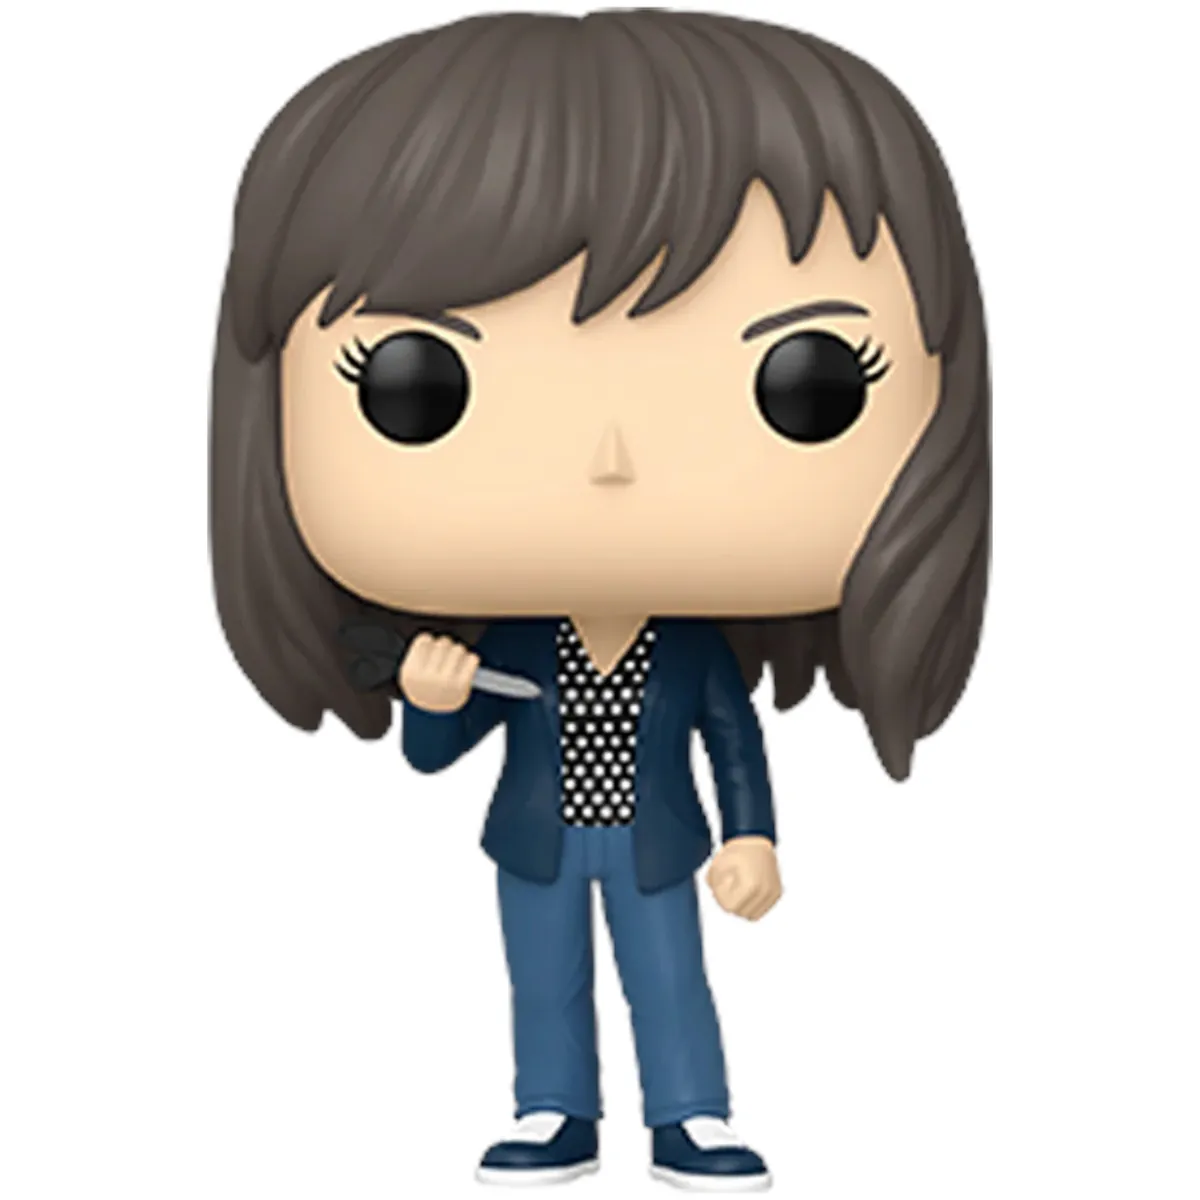 80172 Funko Pop! Television - Parks And Recreation - April Ludgate Collectable Vinyl Figure